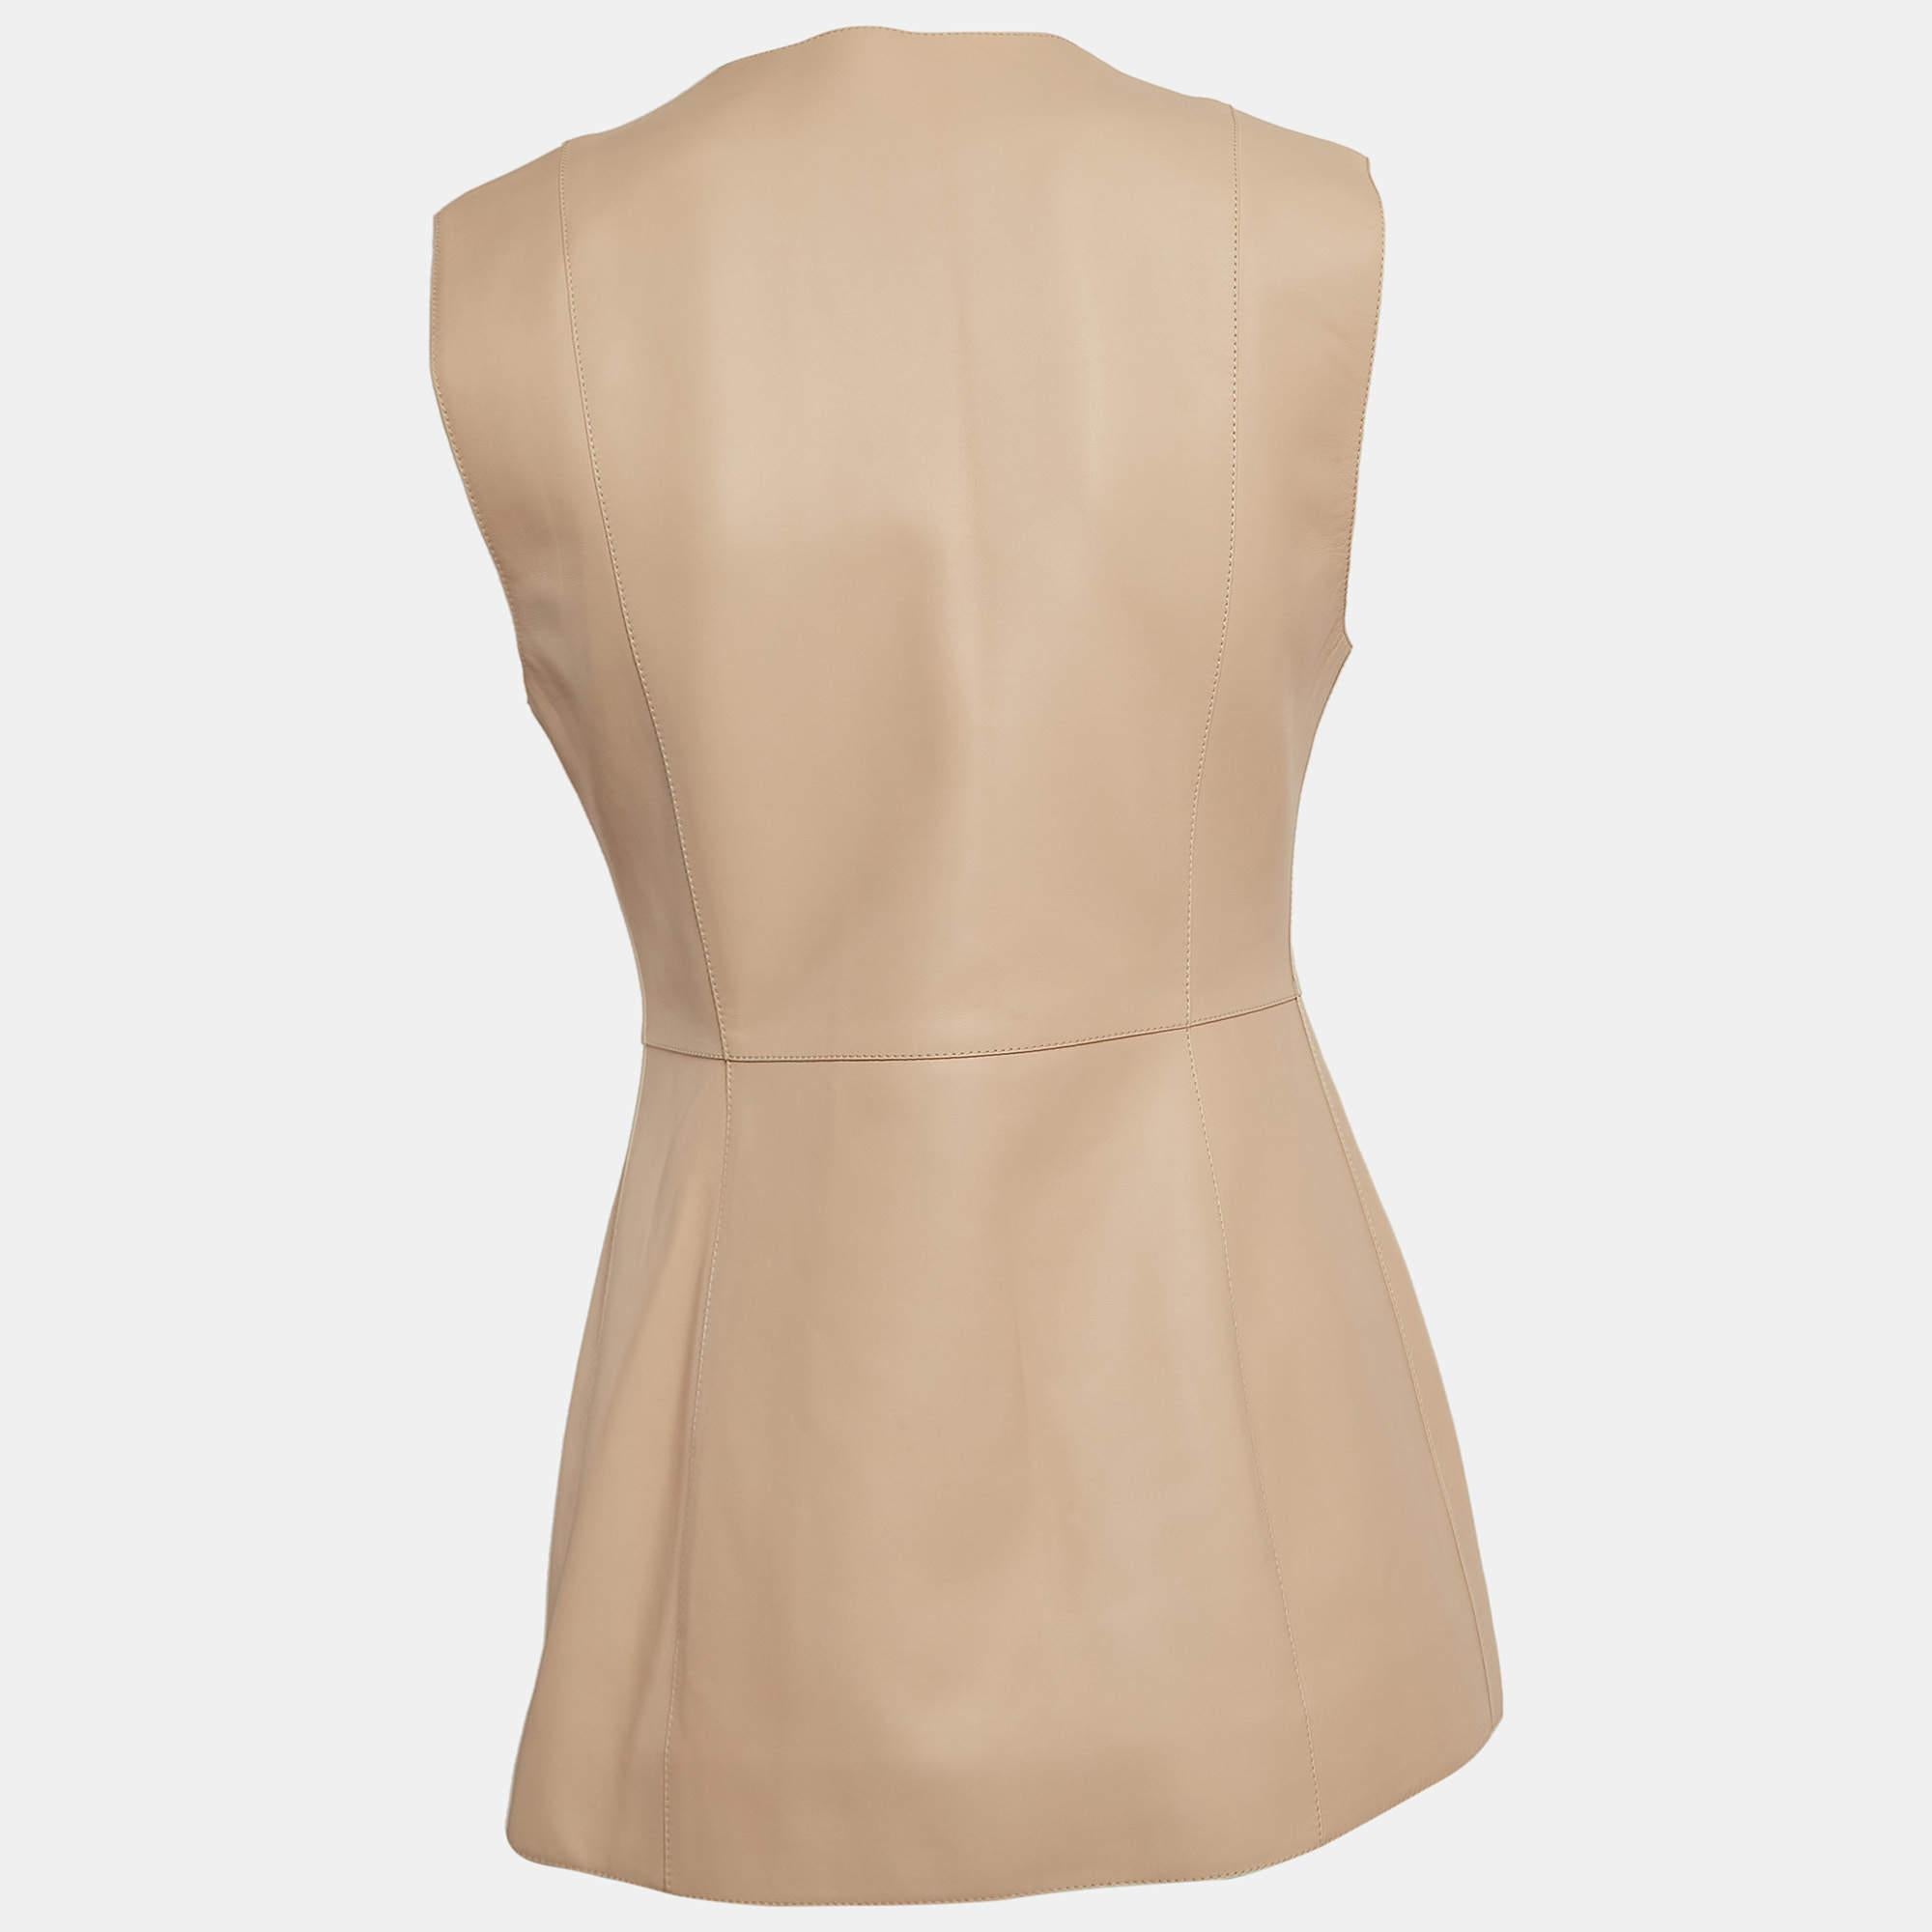 Easy to pair with skirts, shorts, or pants, Hermes's vest ensures versatile styling options. It is tailored using wool, and it features pretty buttons for a fashionable finish.

